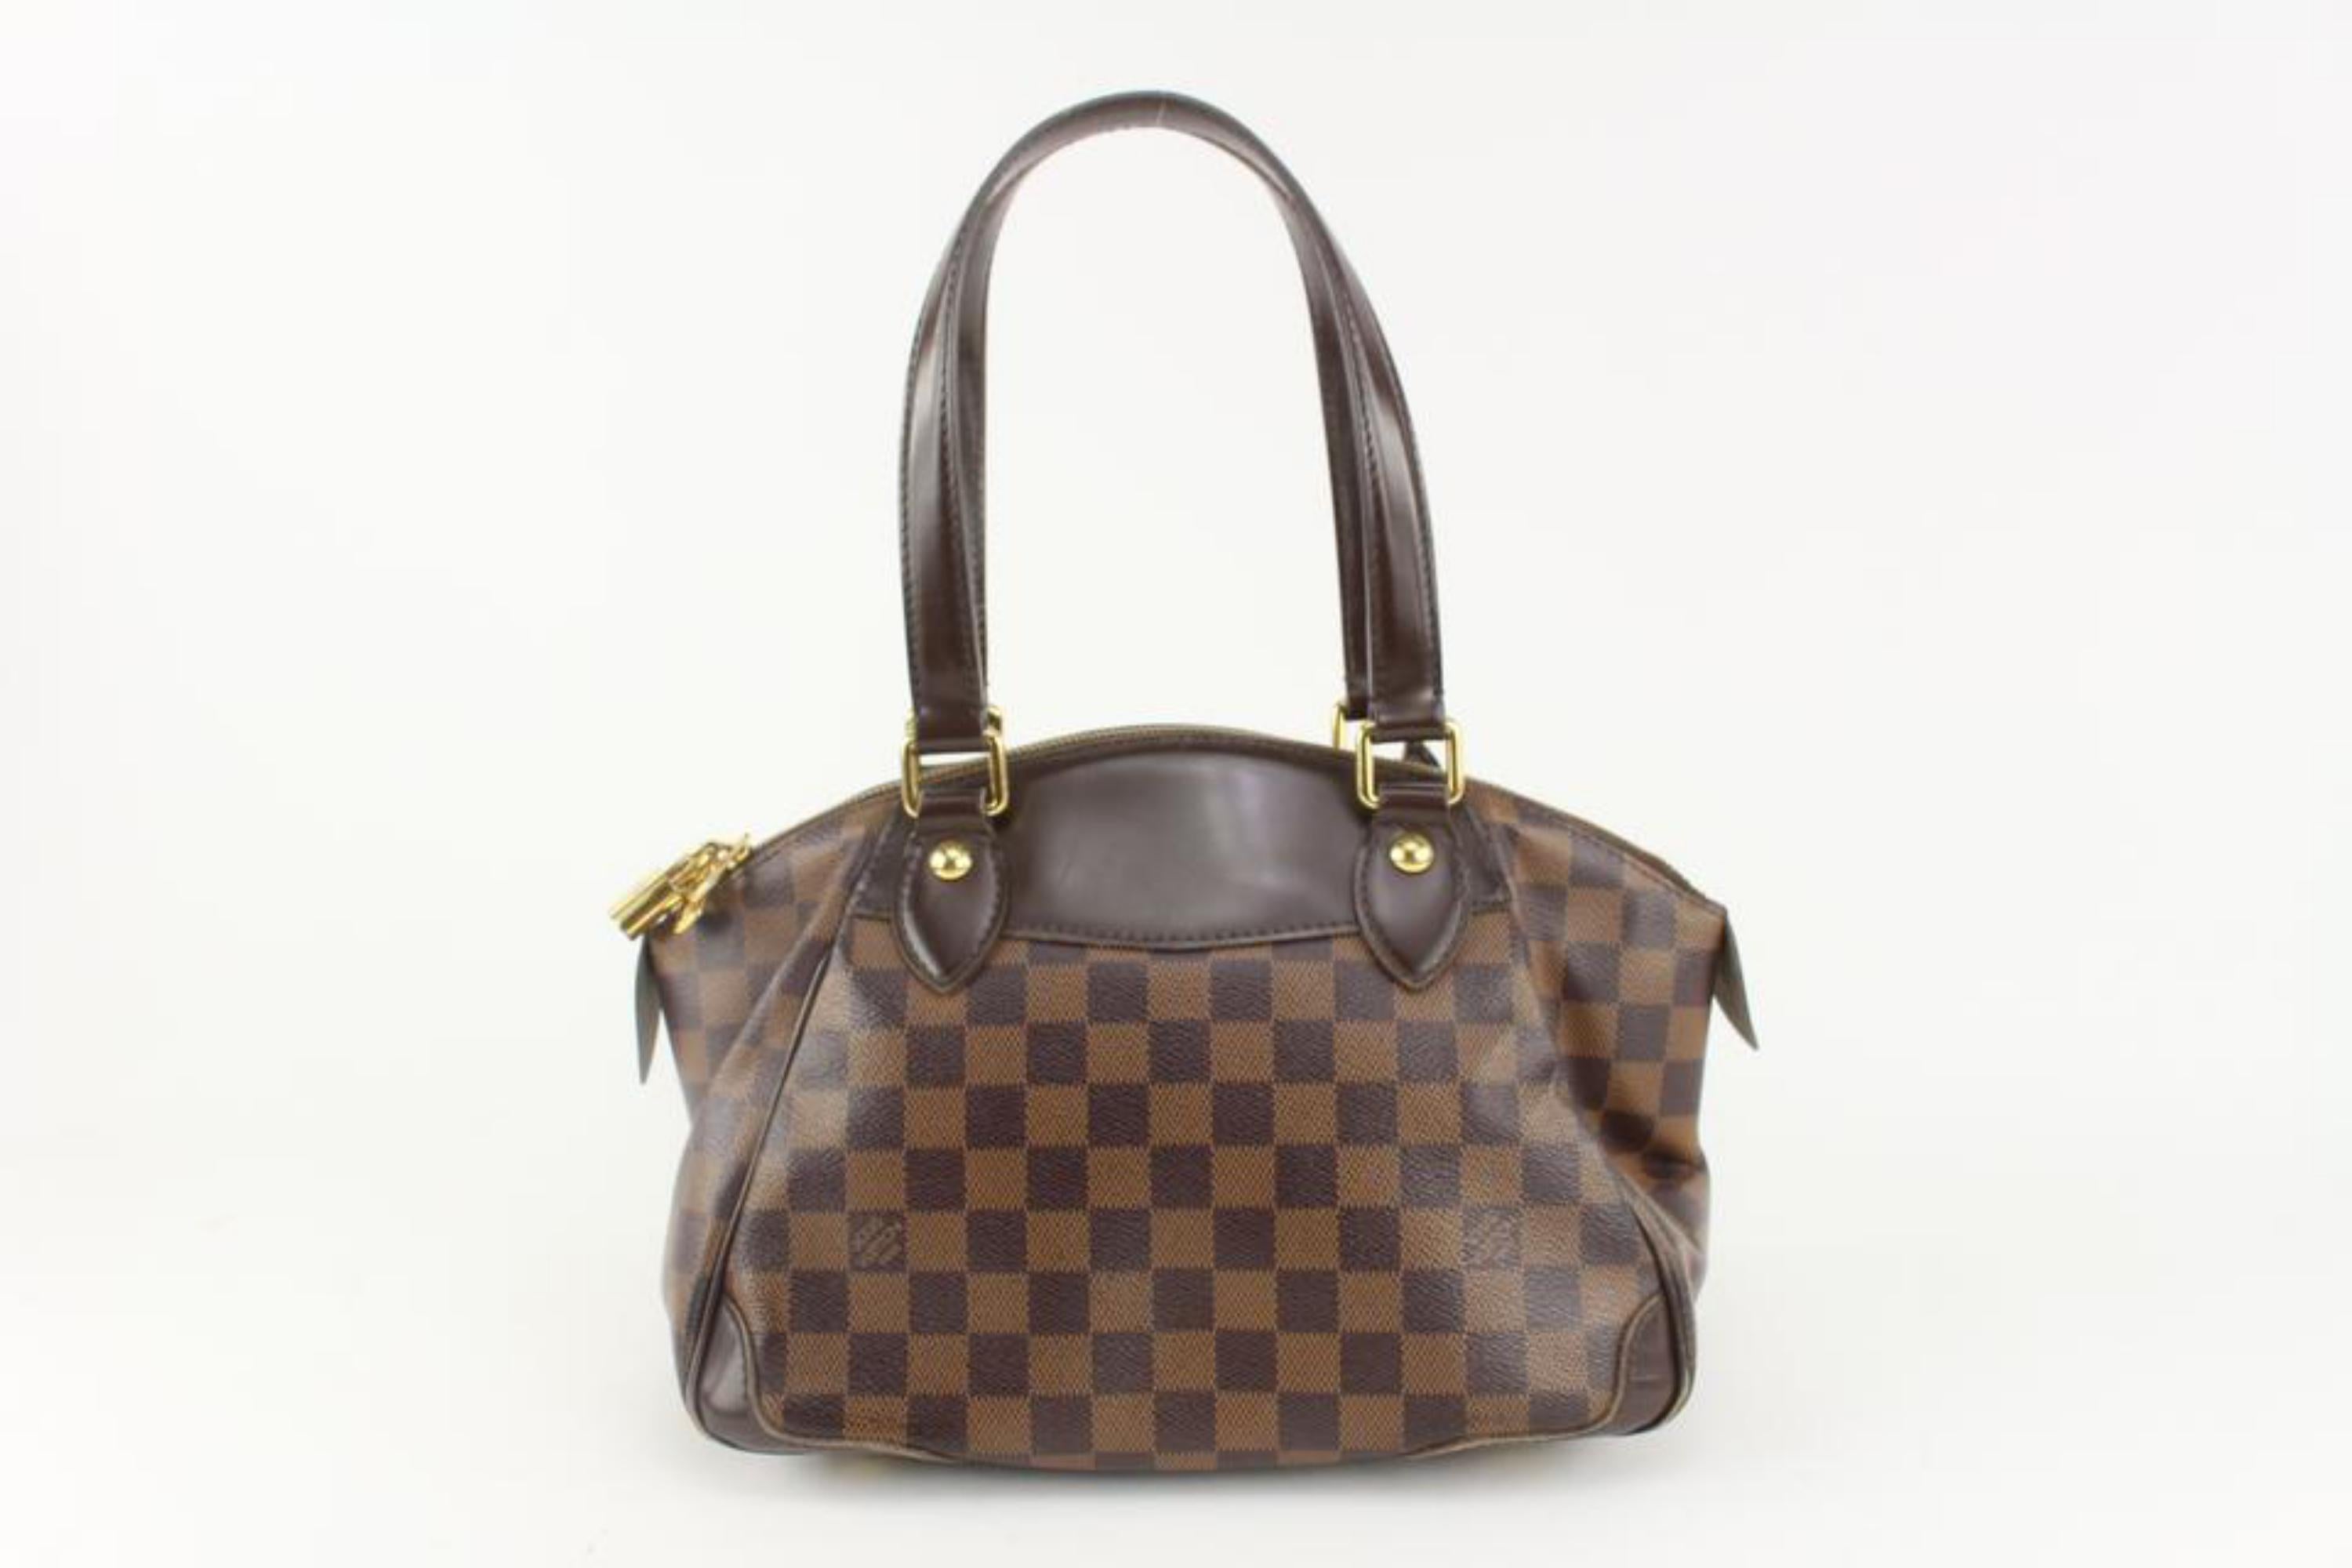 Louis Vuitton Damier Ebene Verona Bowling Bag 126lv47 In Good Condition For Sale In Dix hills, NY